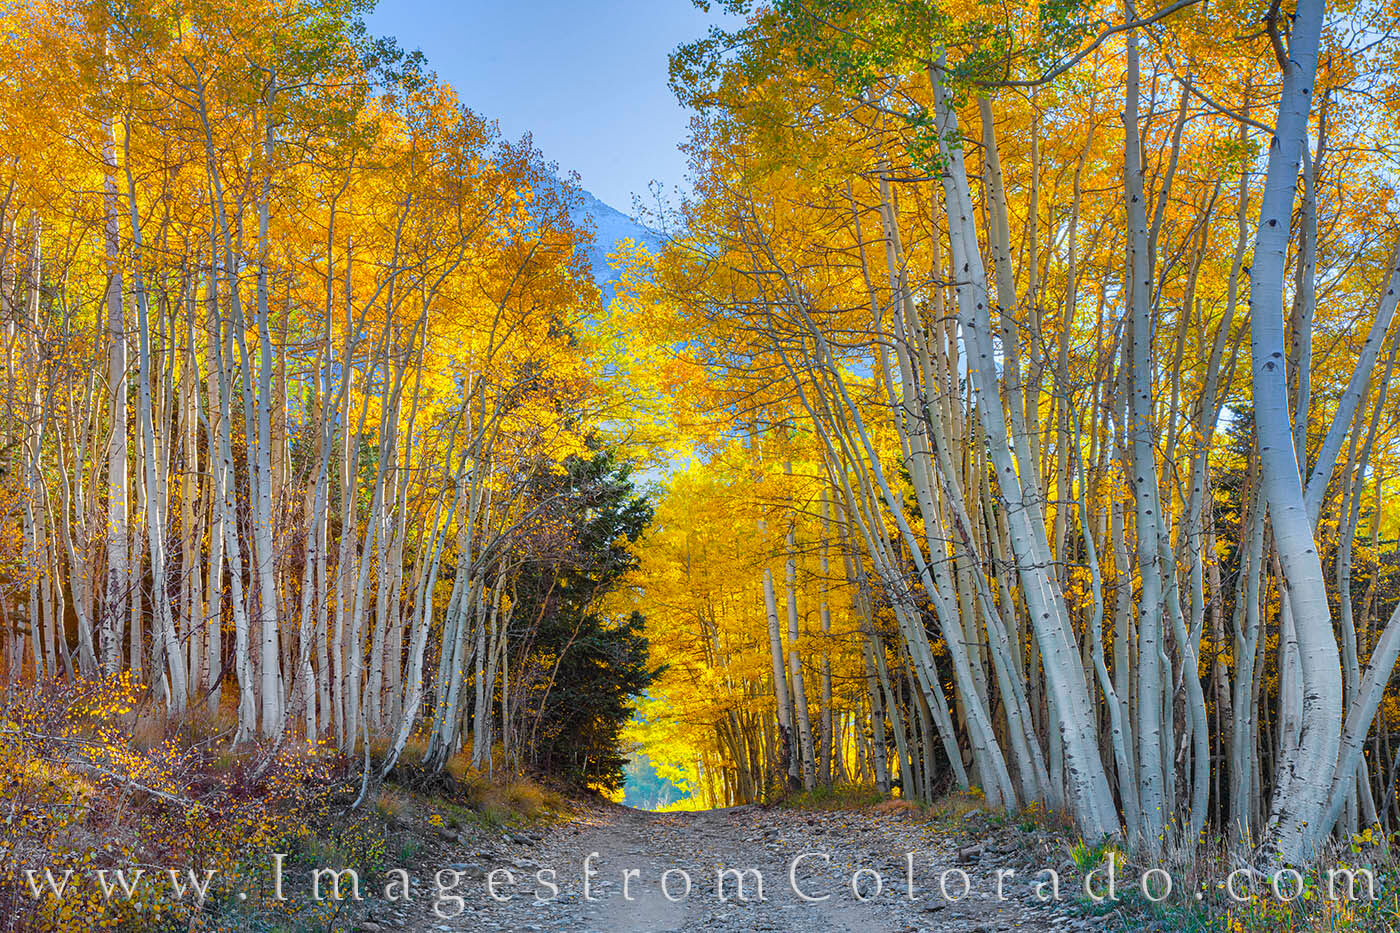 While searching for the “Dancing Aspen” trees along Ophir Pass, I came across this grove of aspen trees in full gold colors...